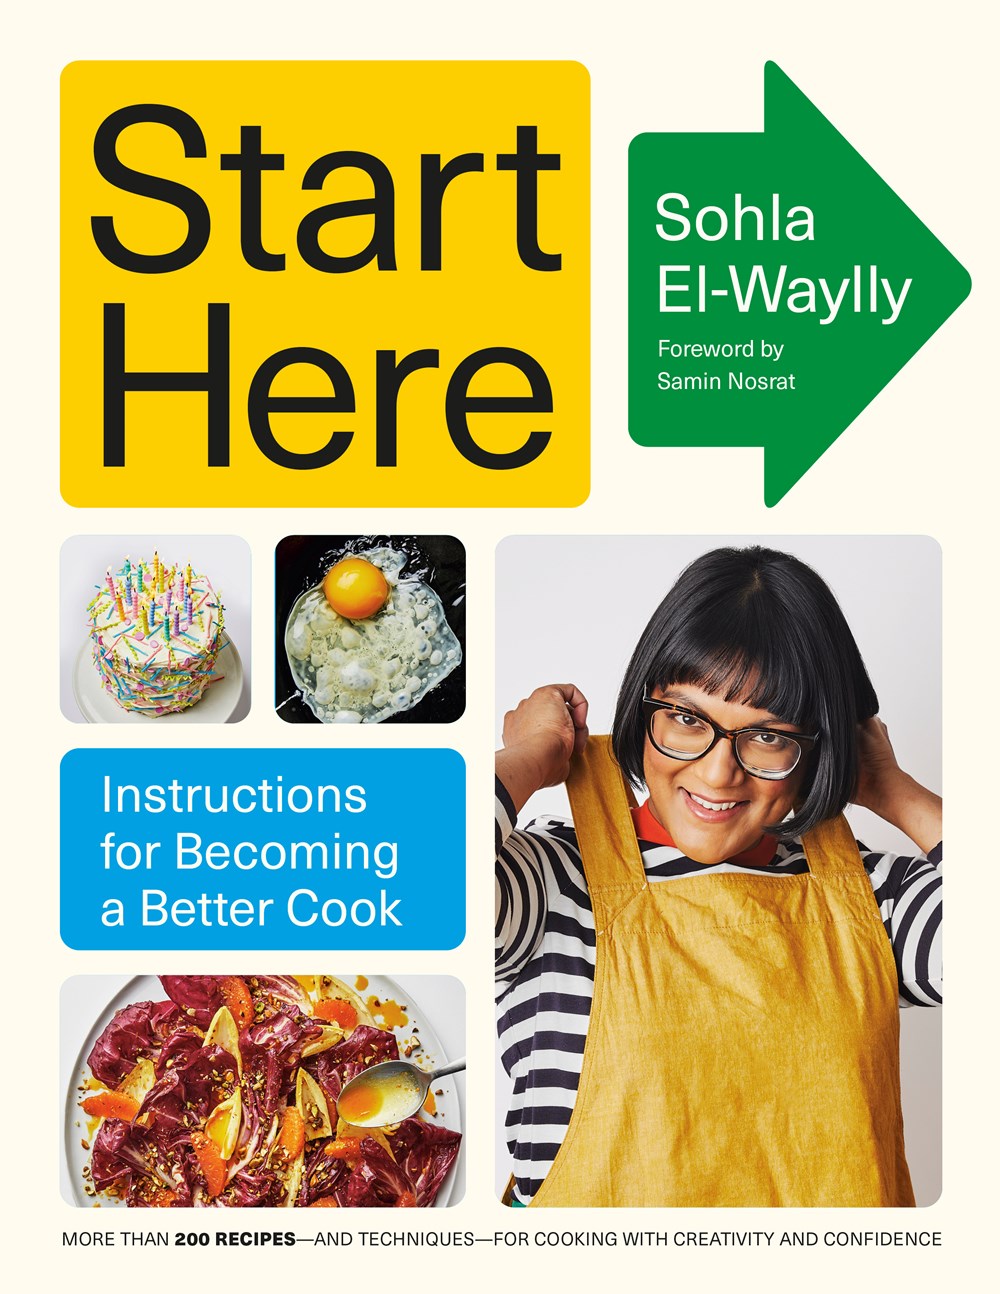 Start Here: Instructions for Becoming a Better Cook by Sohla El-Waylly (with a Foreword by Samin Nosrat) (10/31/23)